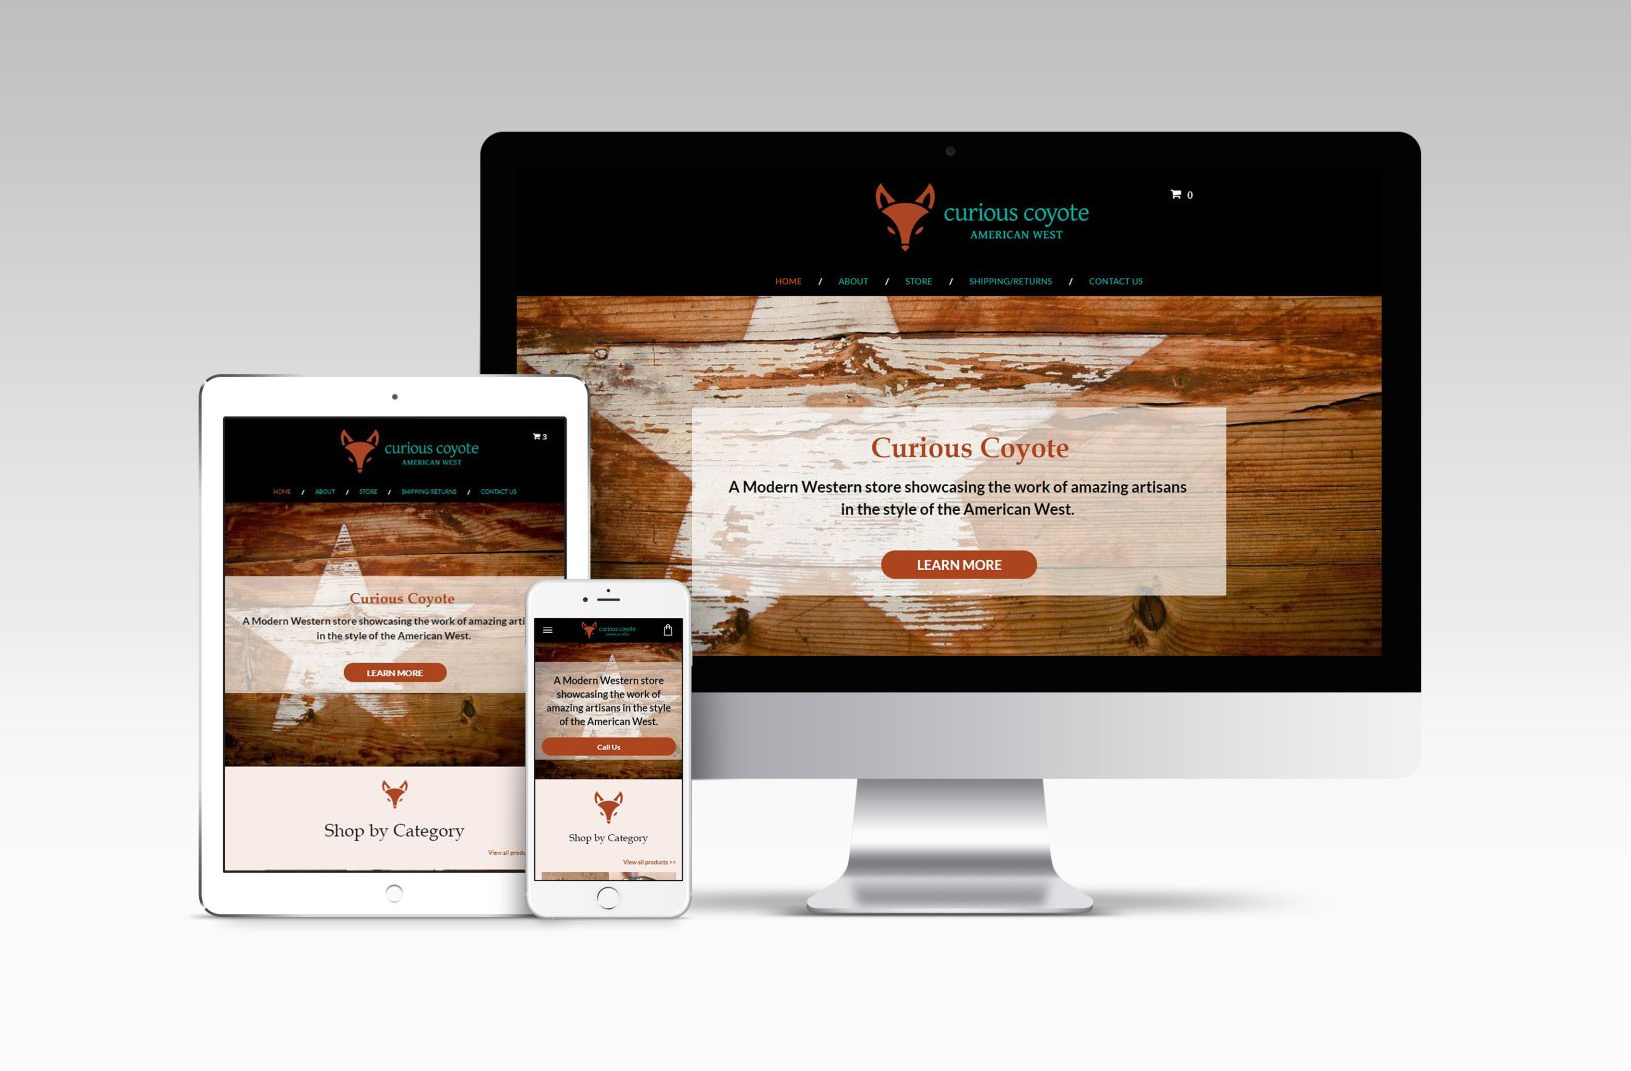 Curious Coyote website design by C&B Marketing